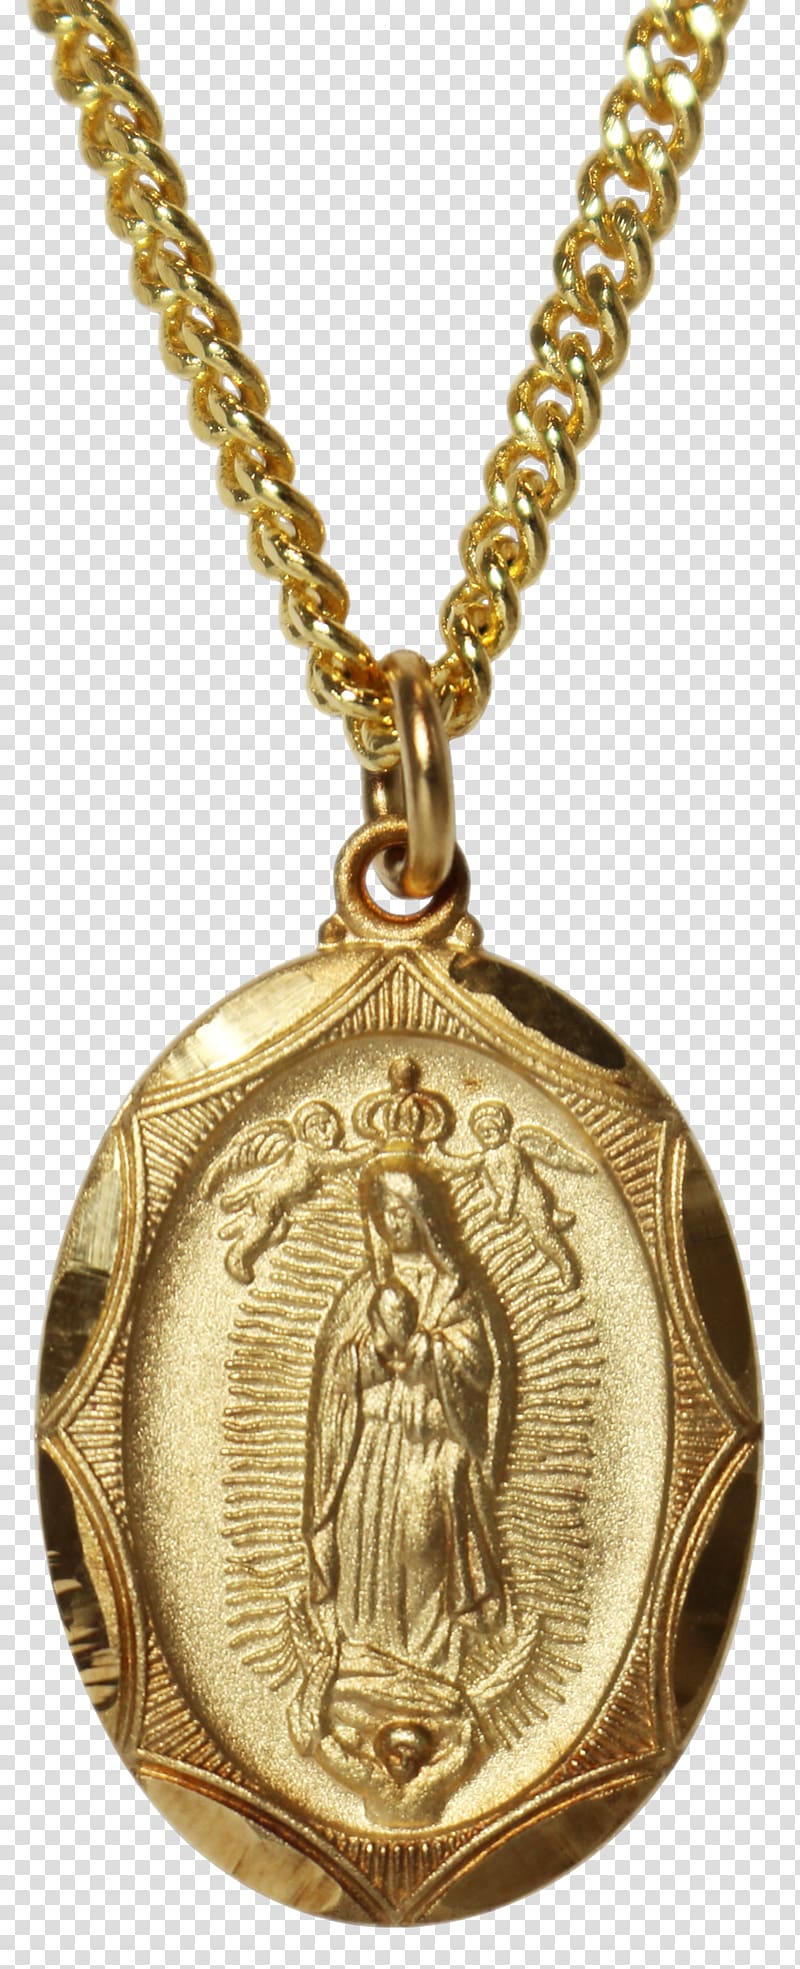 Charms & Pendants Medal Gold Necklace Our Lady of Guadalupe, cartoon gold medal transparent background PNG clipart